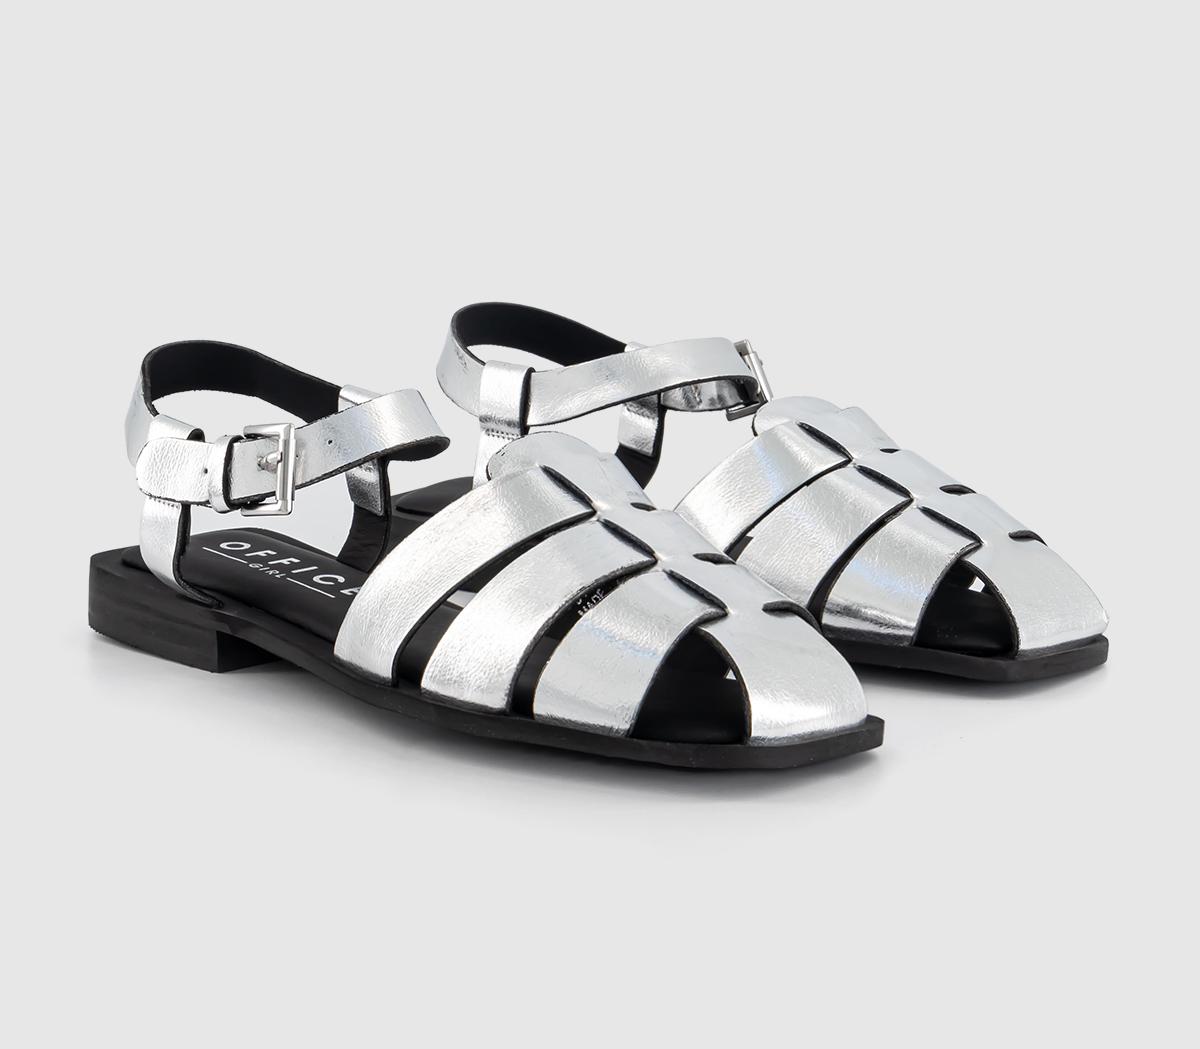 OFFICE Womens Sovereign Gladiator Sandals Silver, 8